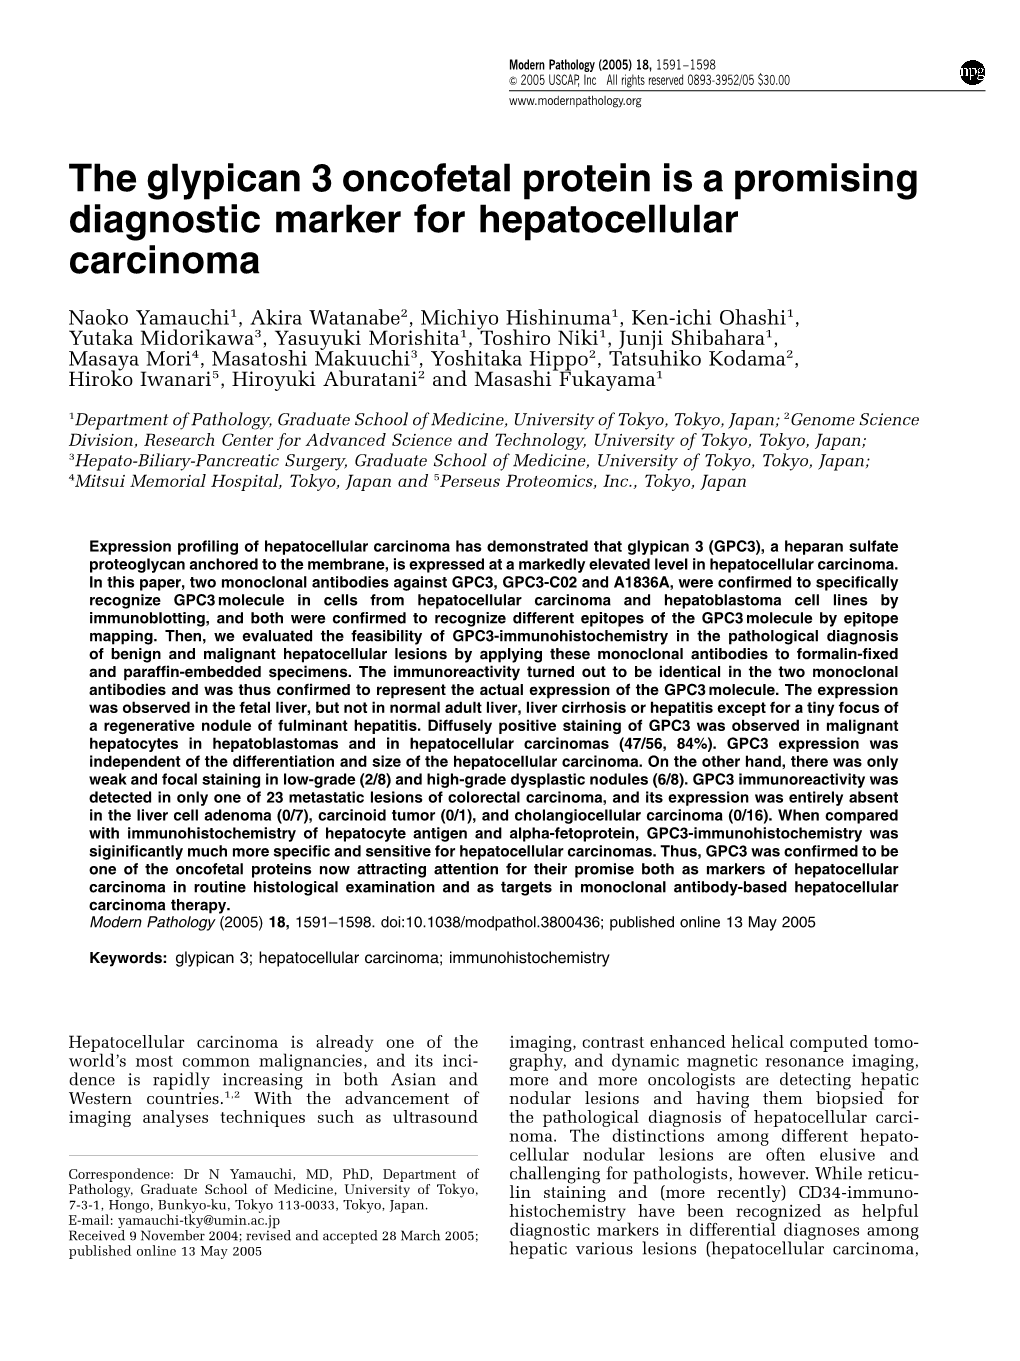 The Glypican 3 Oncofetal Protein Is a Promising Diagnostic Marker for Hepatocellular Carcinoma